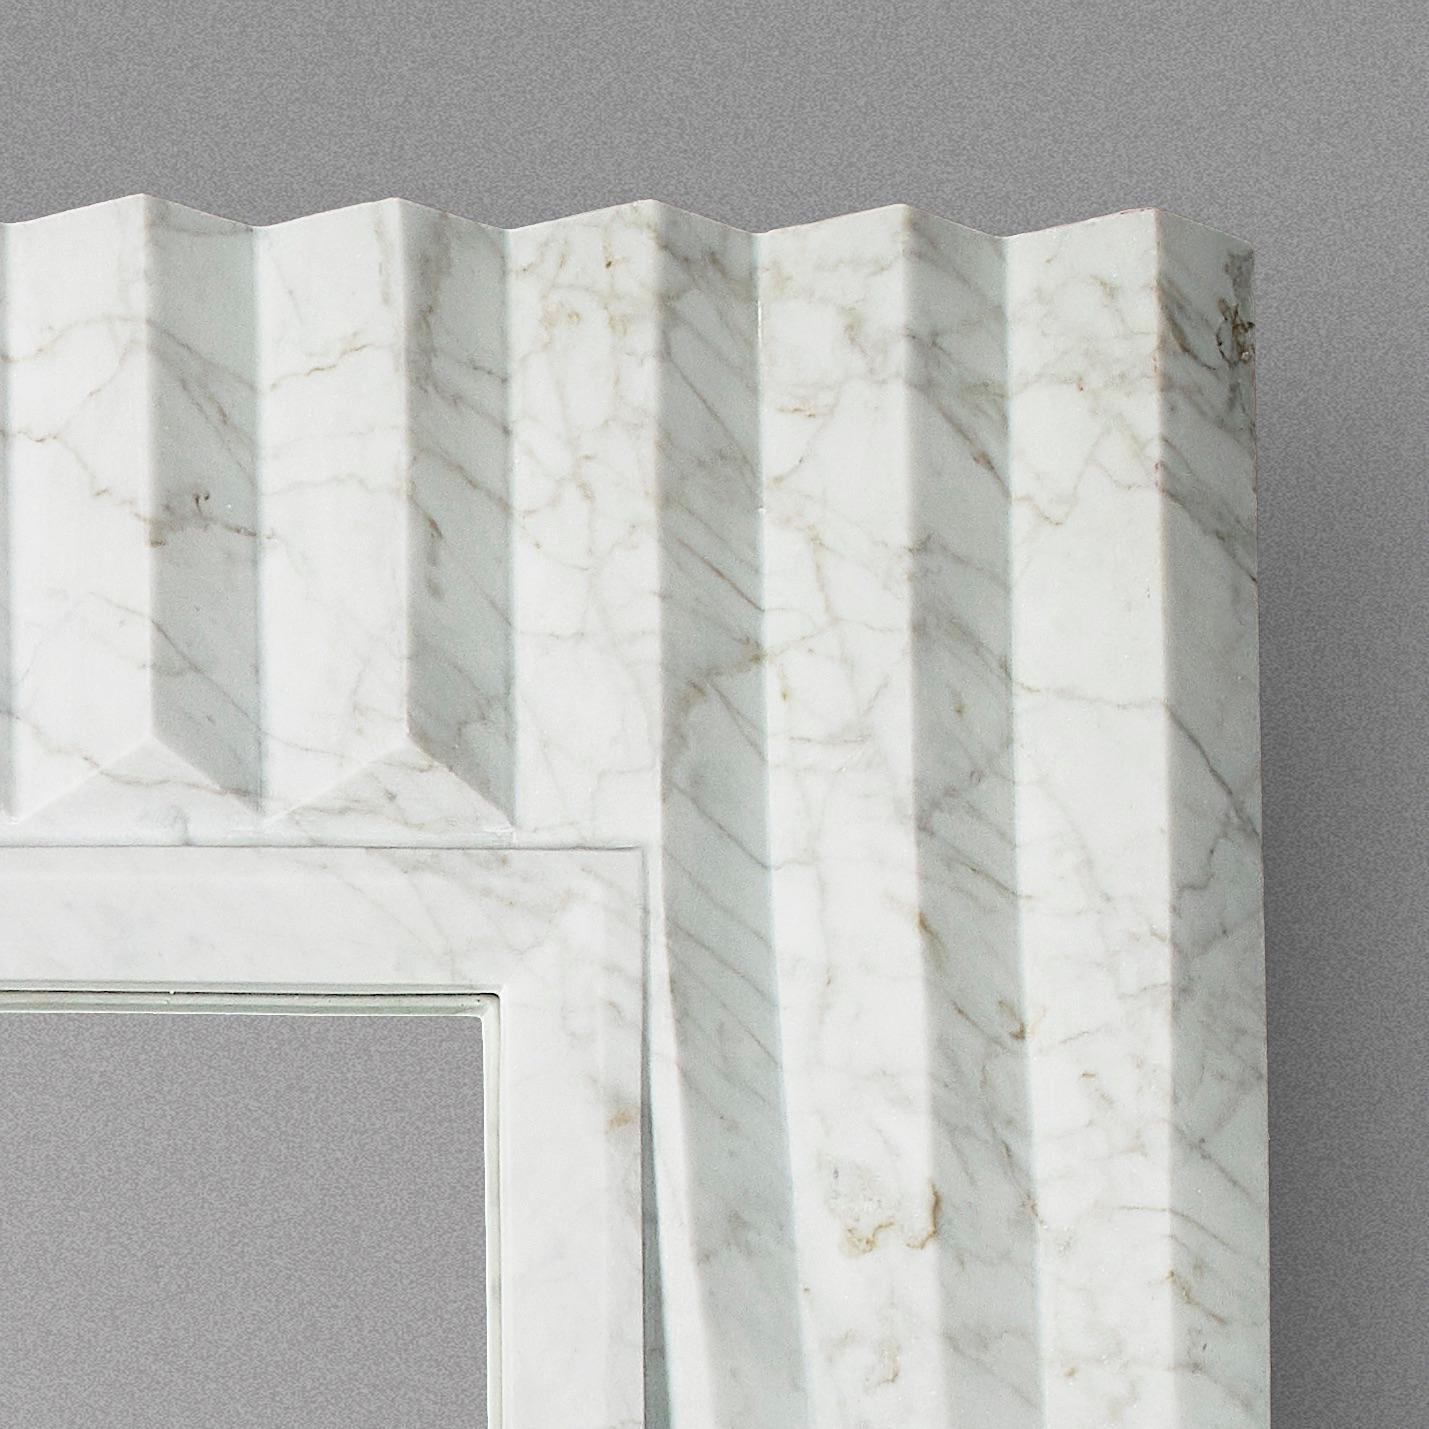 Cosulich Interiors in collaboration with Atelier Terrai: Italian bespoke mirror, entirely handcrafted in Italy, in white carrara marble with an elegant satin finish. This organic modern design is inspired by nature, earth and water, and speaks about